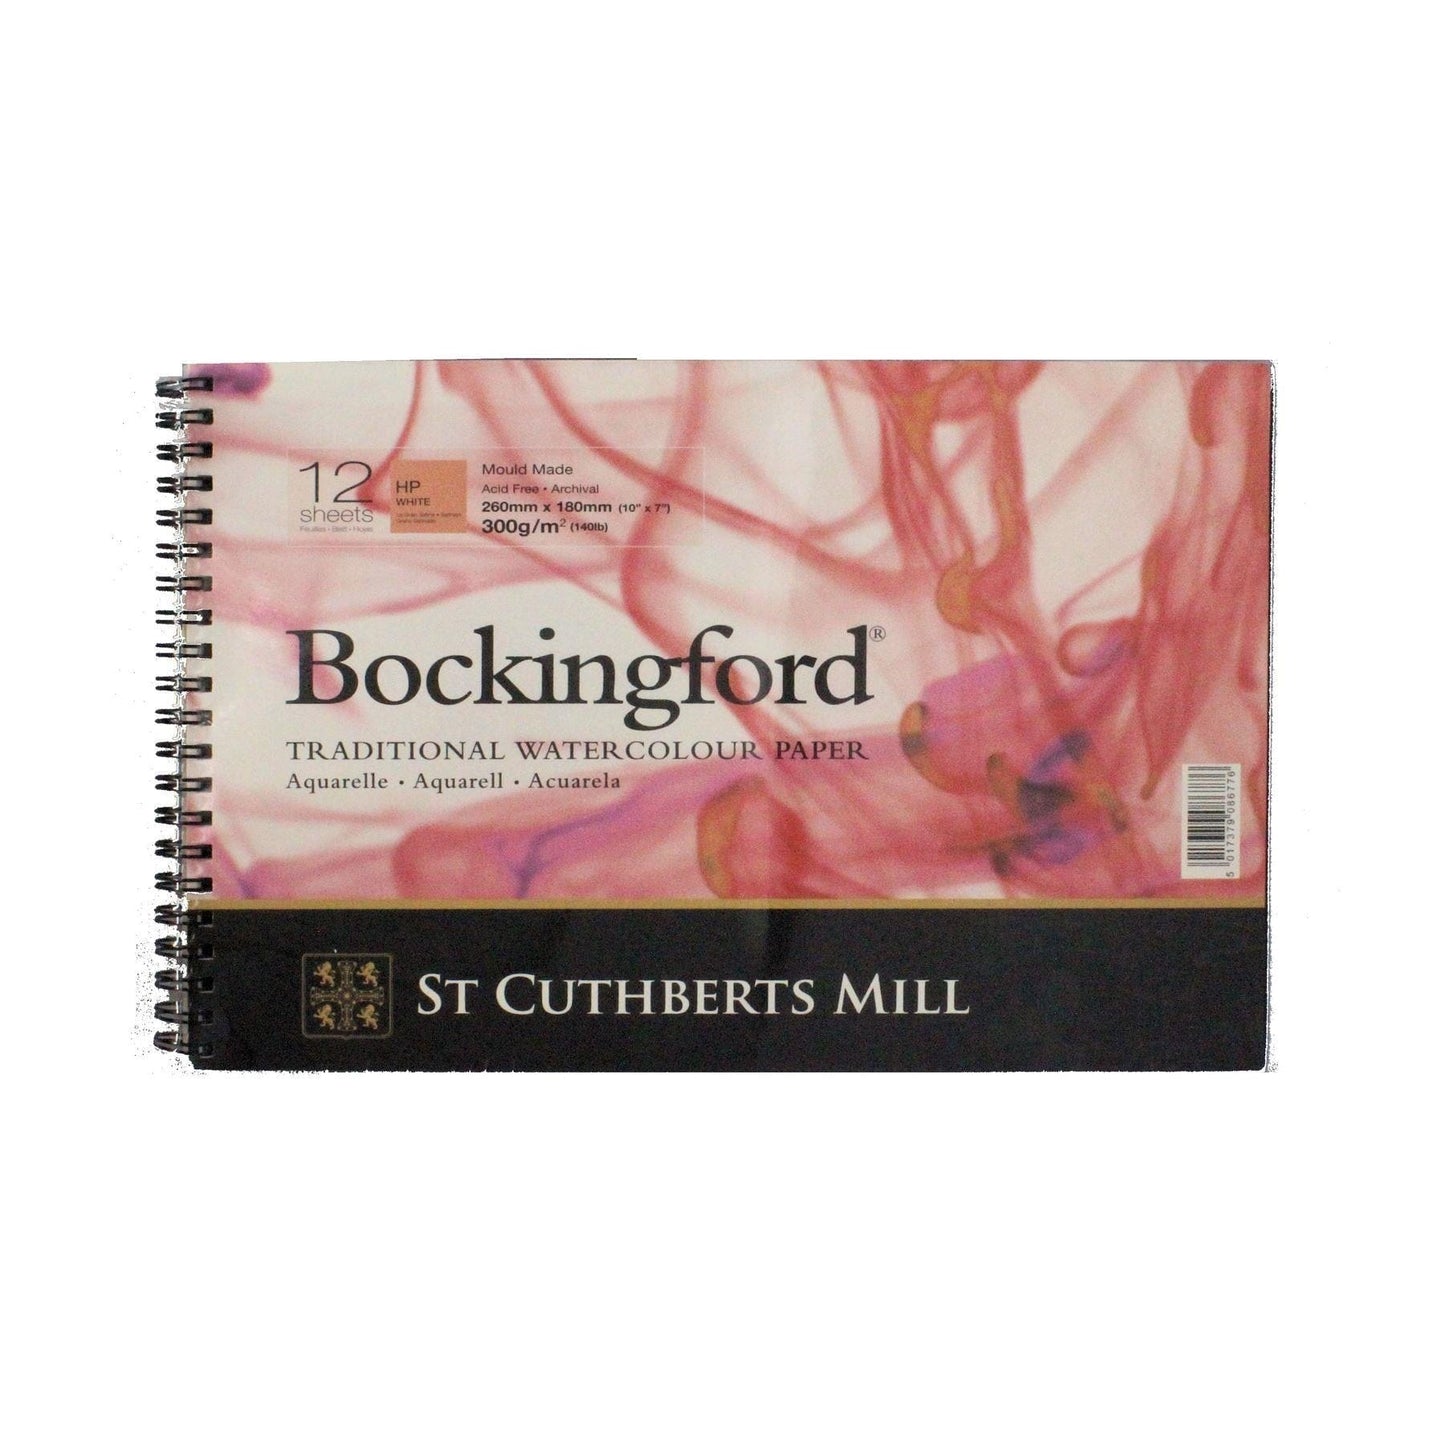 St. Cuthberts Mill Bockingford Watercolor Paper Pad - 16x12-inch White  Water Color Paper for Artists - 12 Sheets of 140lb Cold Press Watercolor  Paper